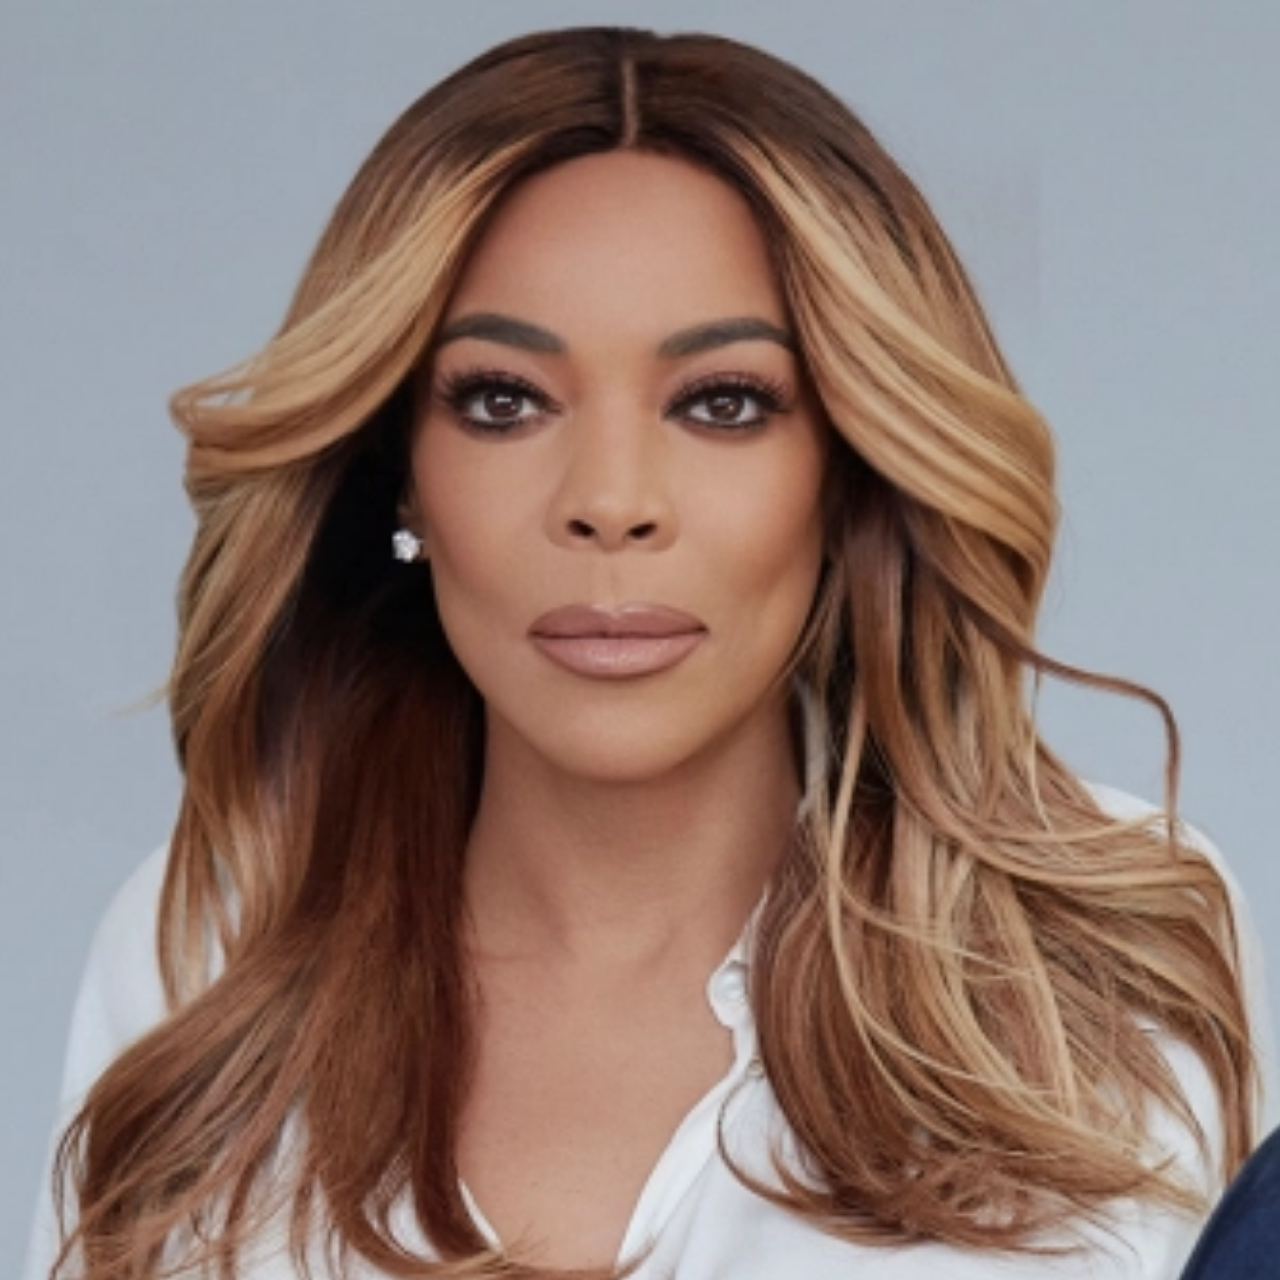 Twitter Reacts to Wendy Williams: The Movie